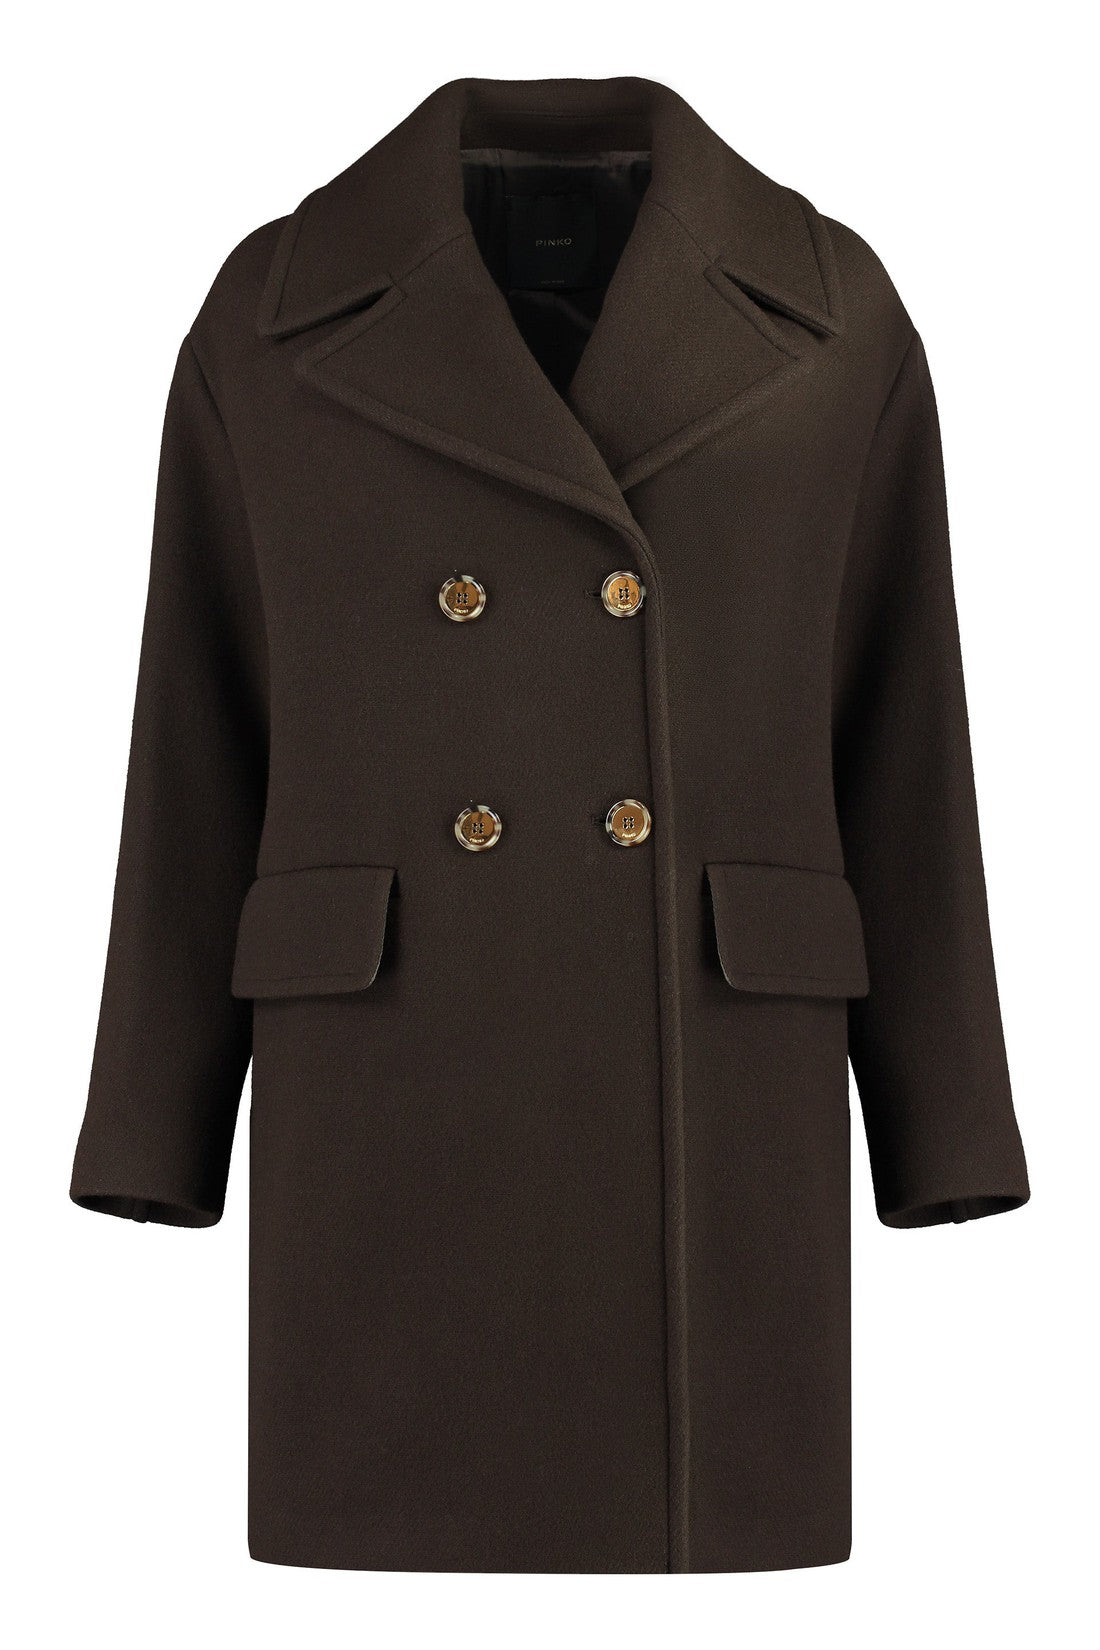 Pinko-OUTLET-SALE-Double-breasted wool coat-ARCHIVIST